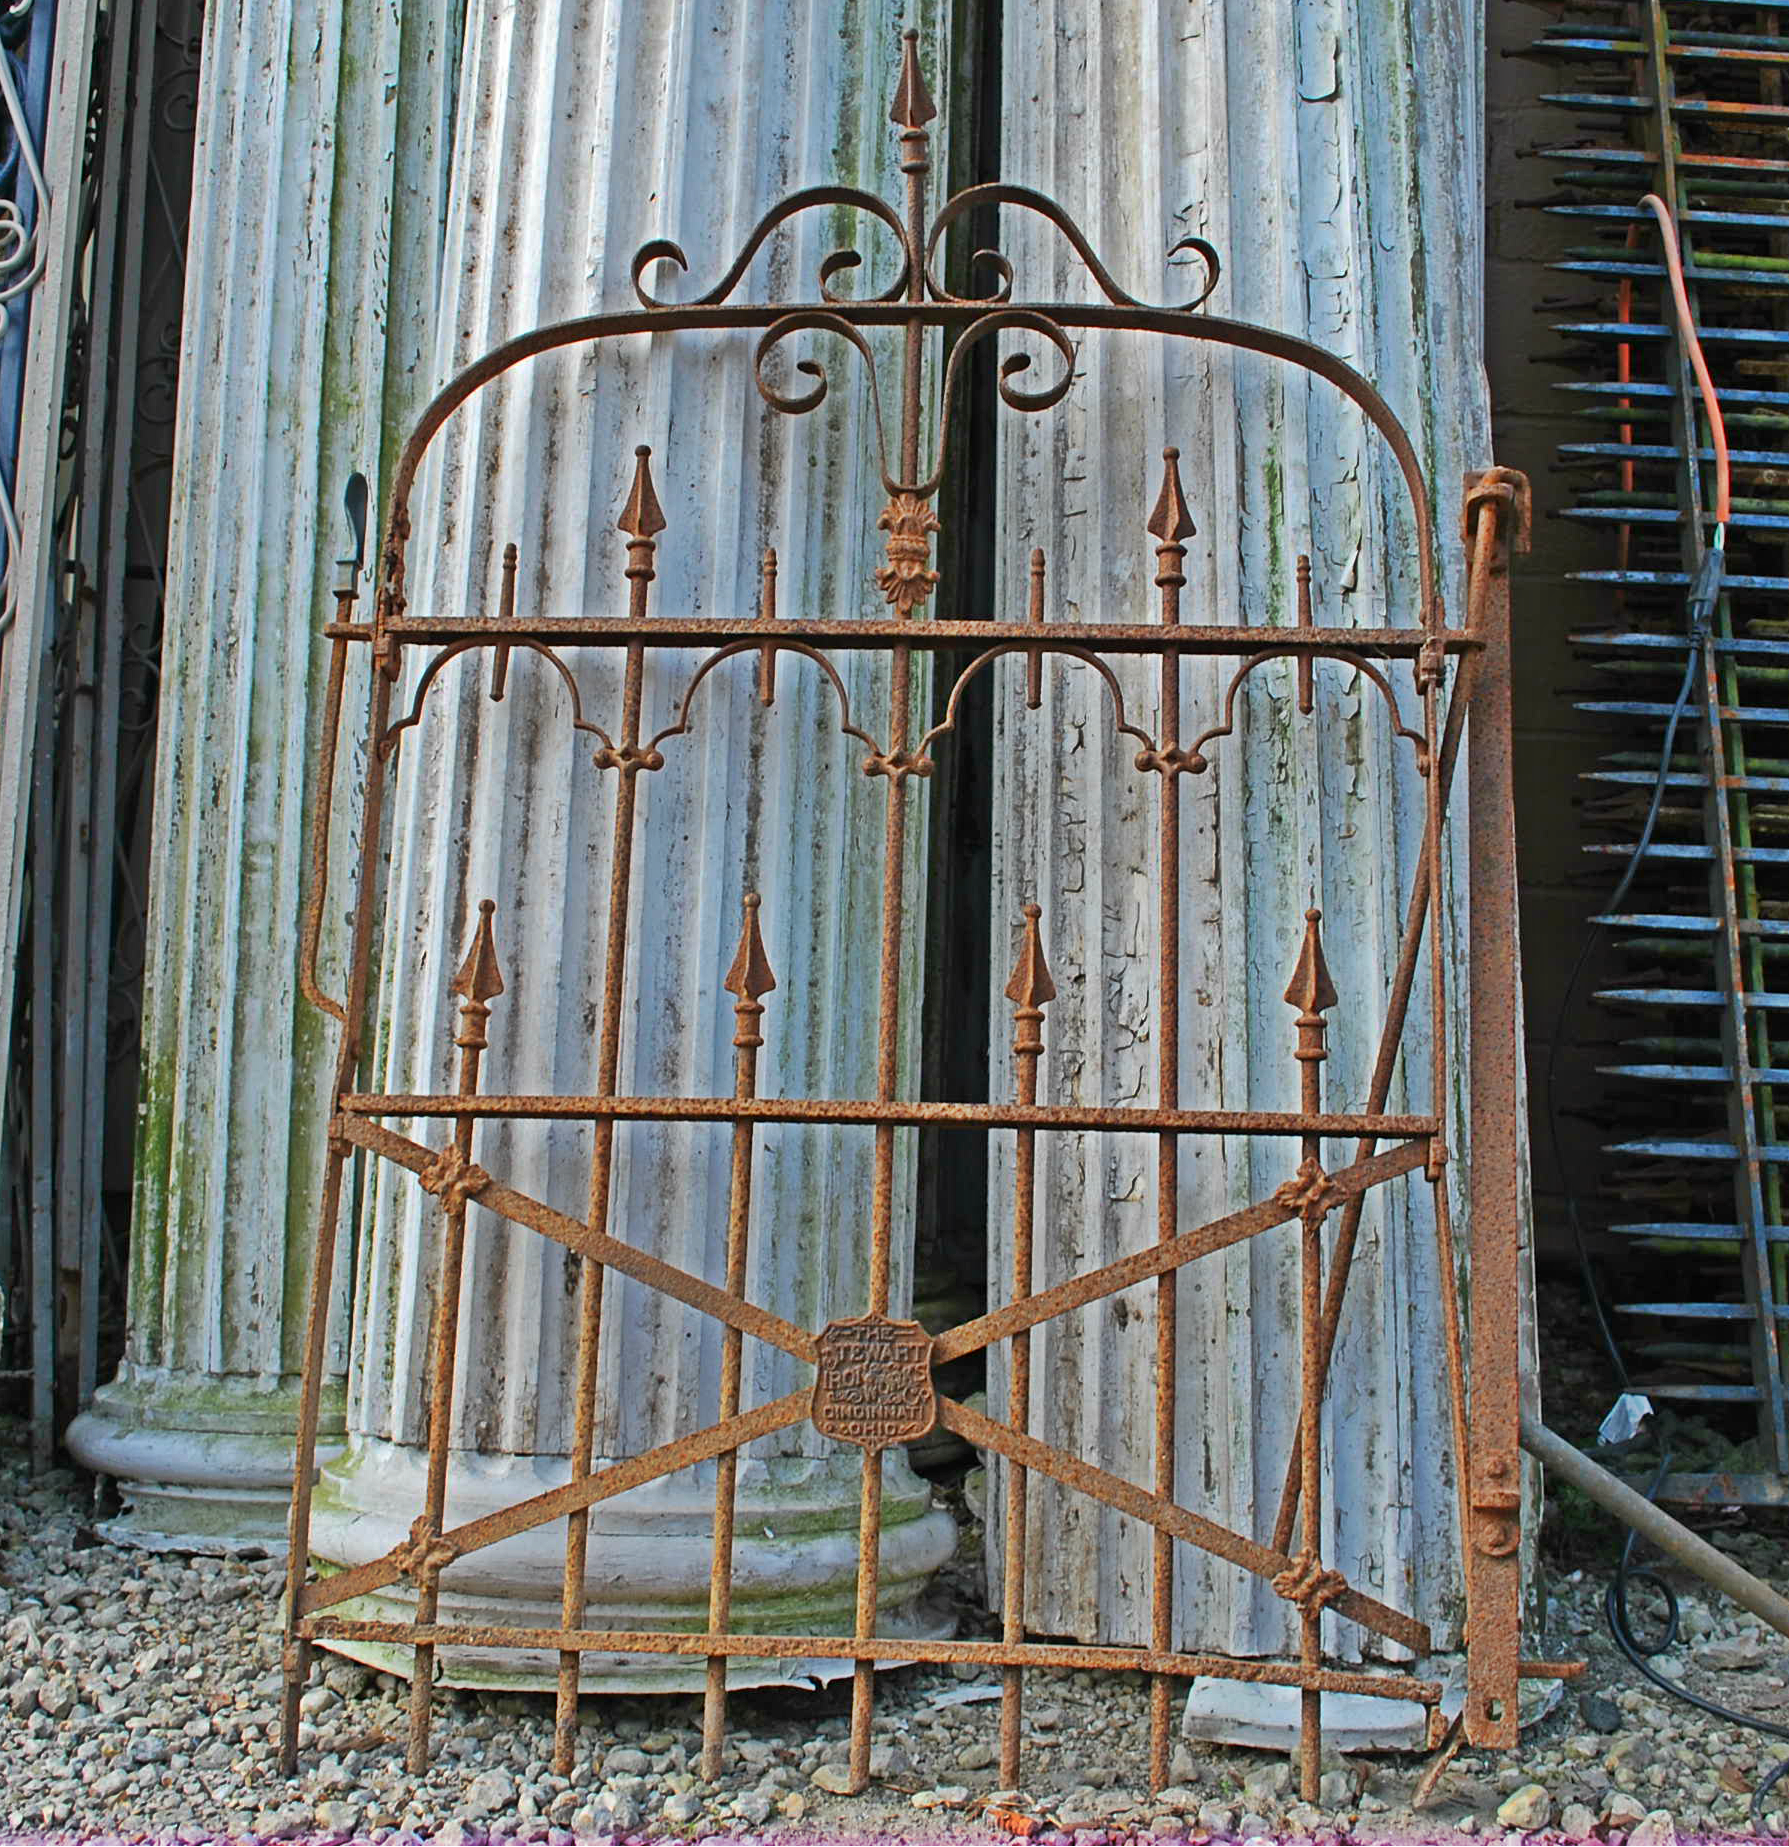 Antique Stewart Iron Works Wrought Iron Gate with exquisite details